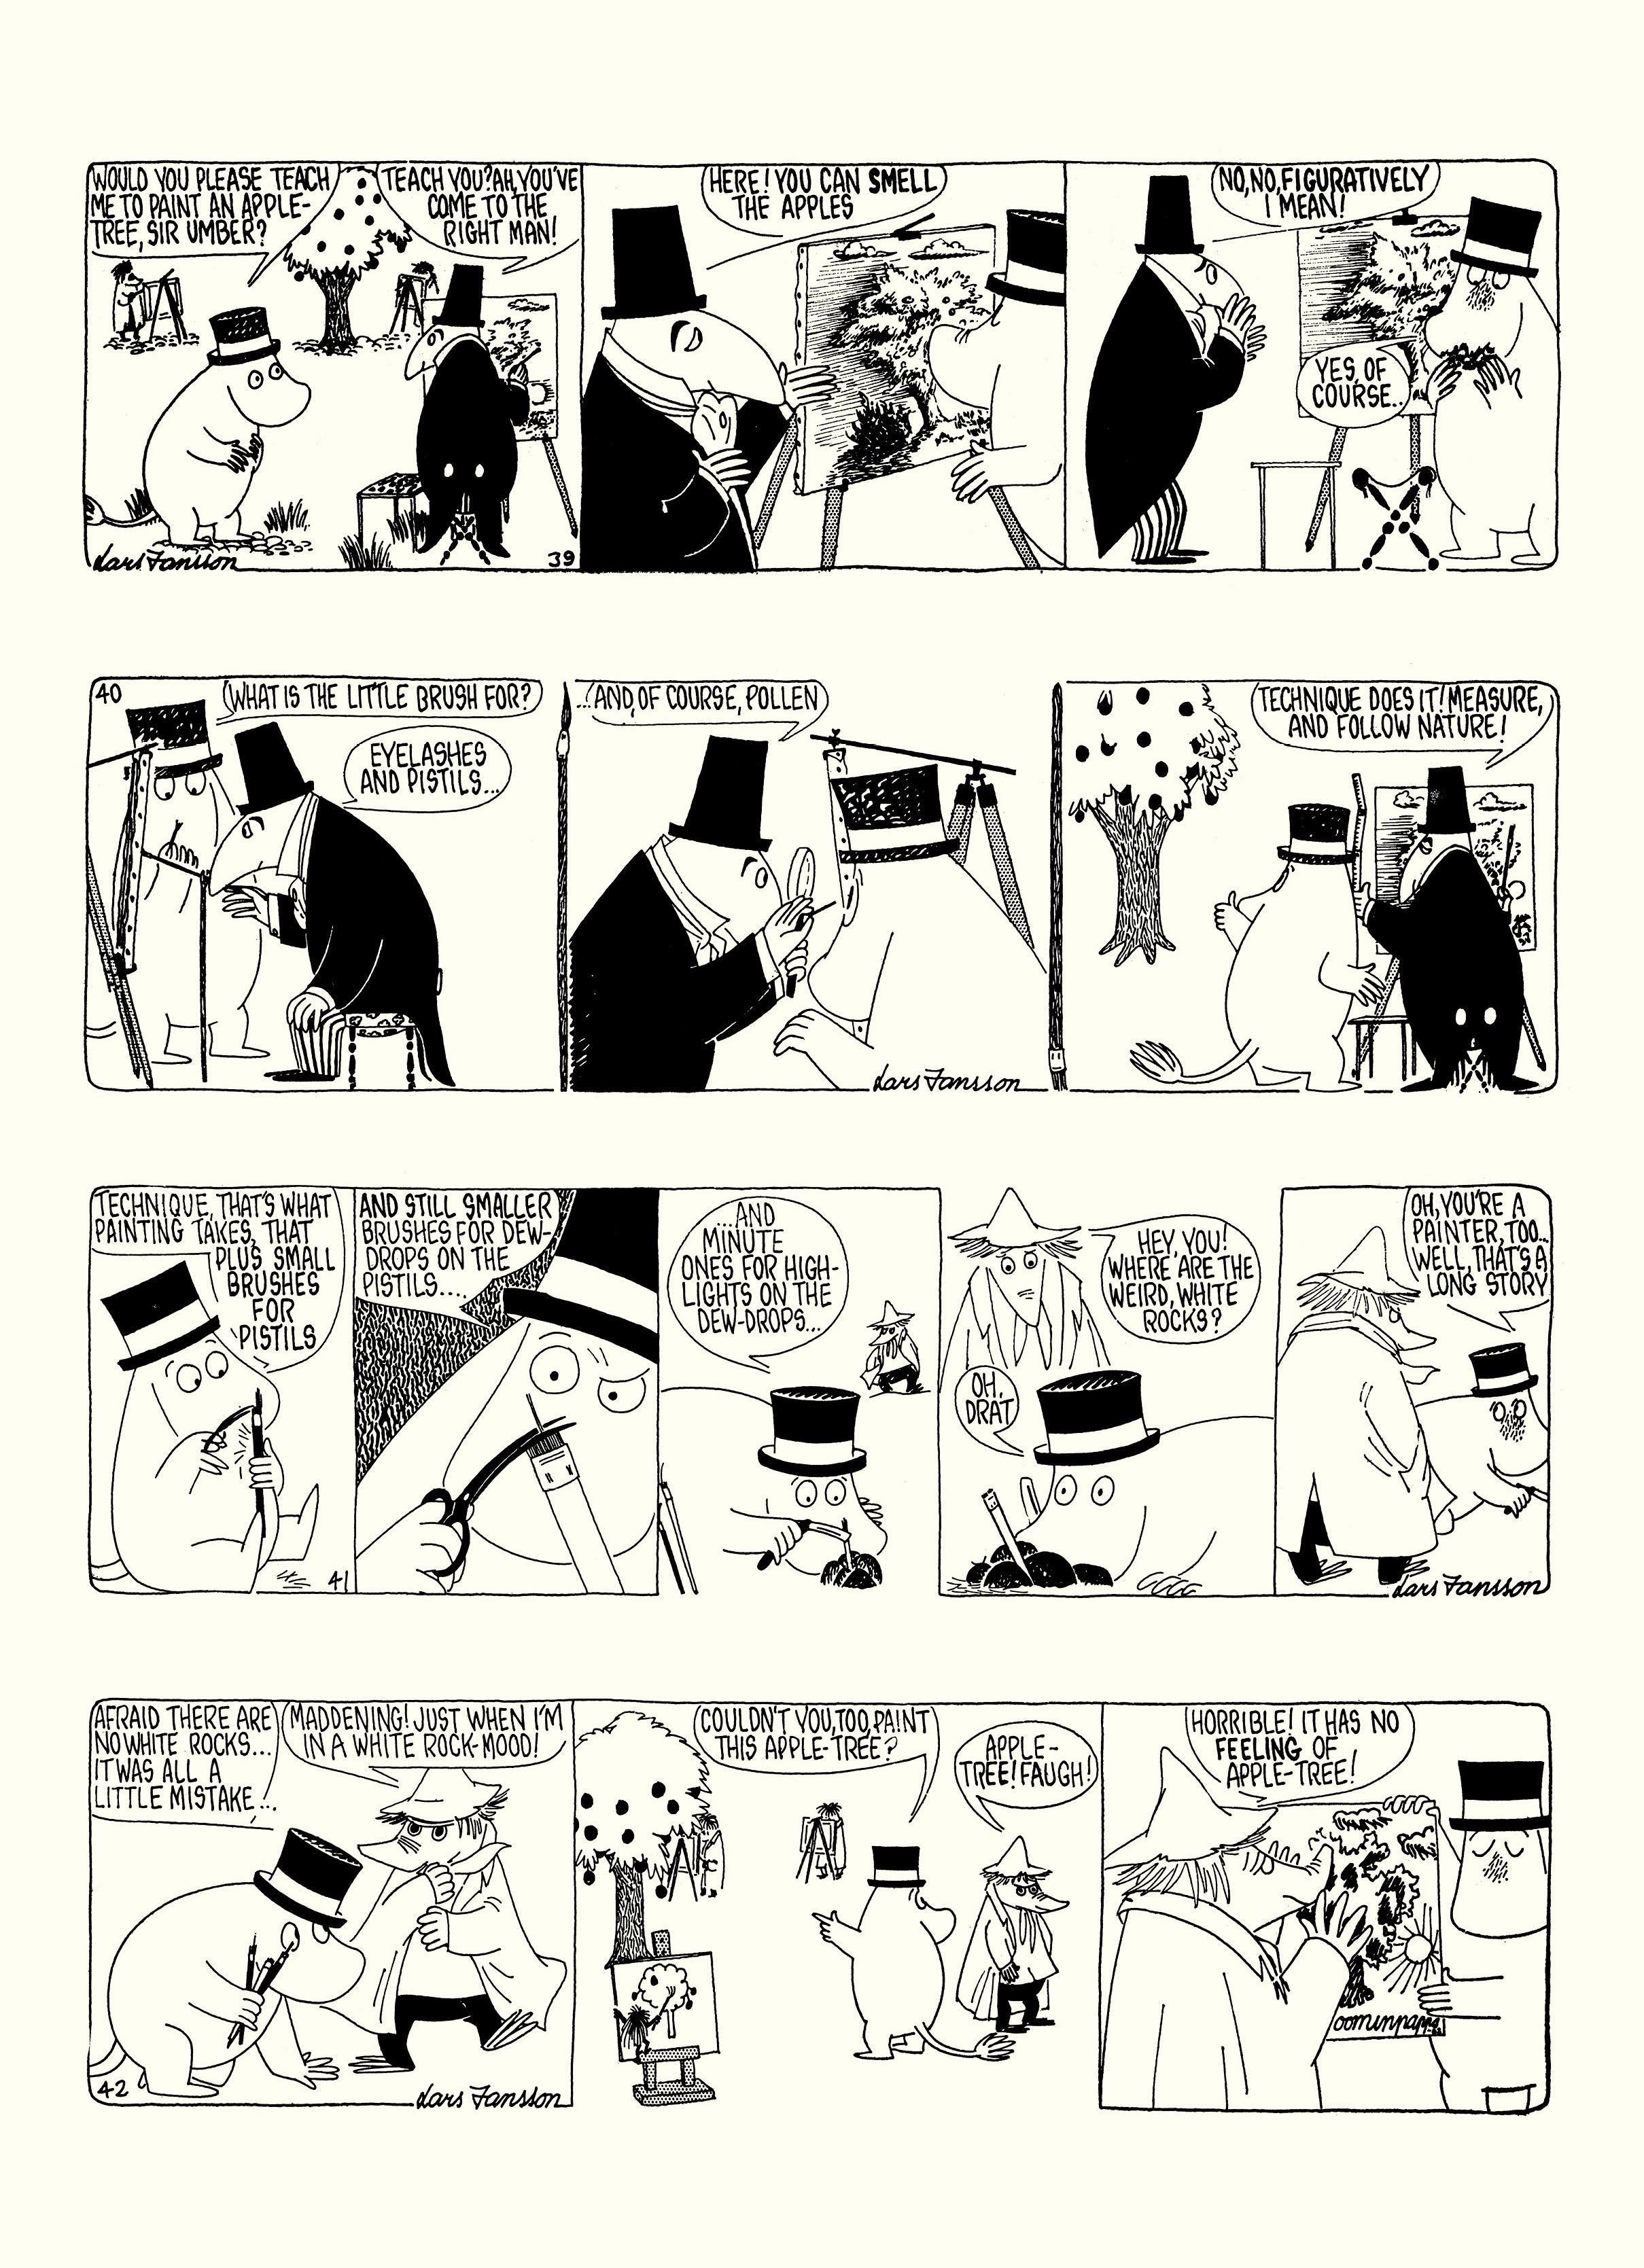 Read online Moomin: The Complete Lars Jansson Comic Strip comic -  Issue # TPB 8 - 37